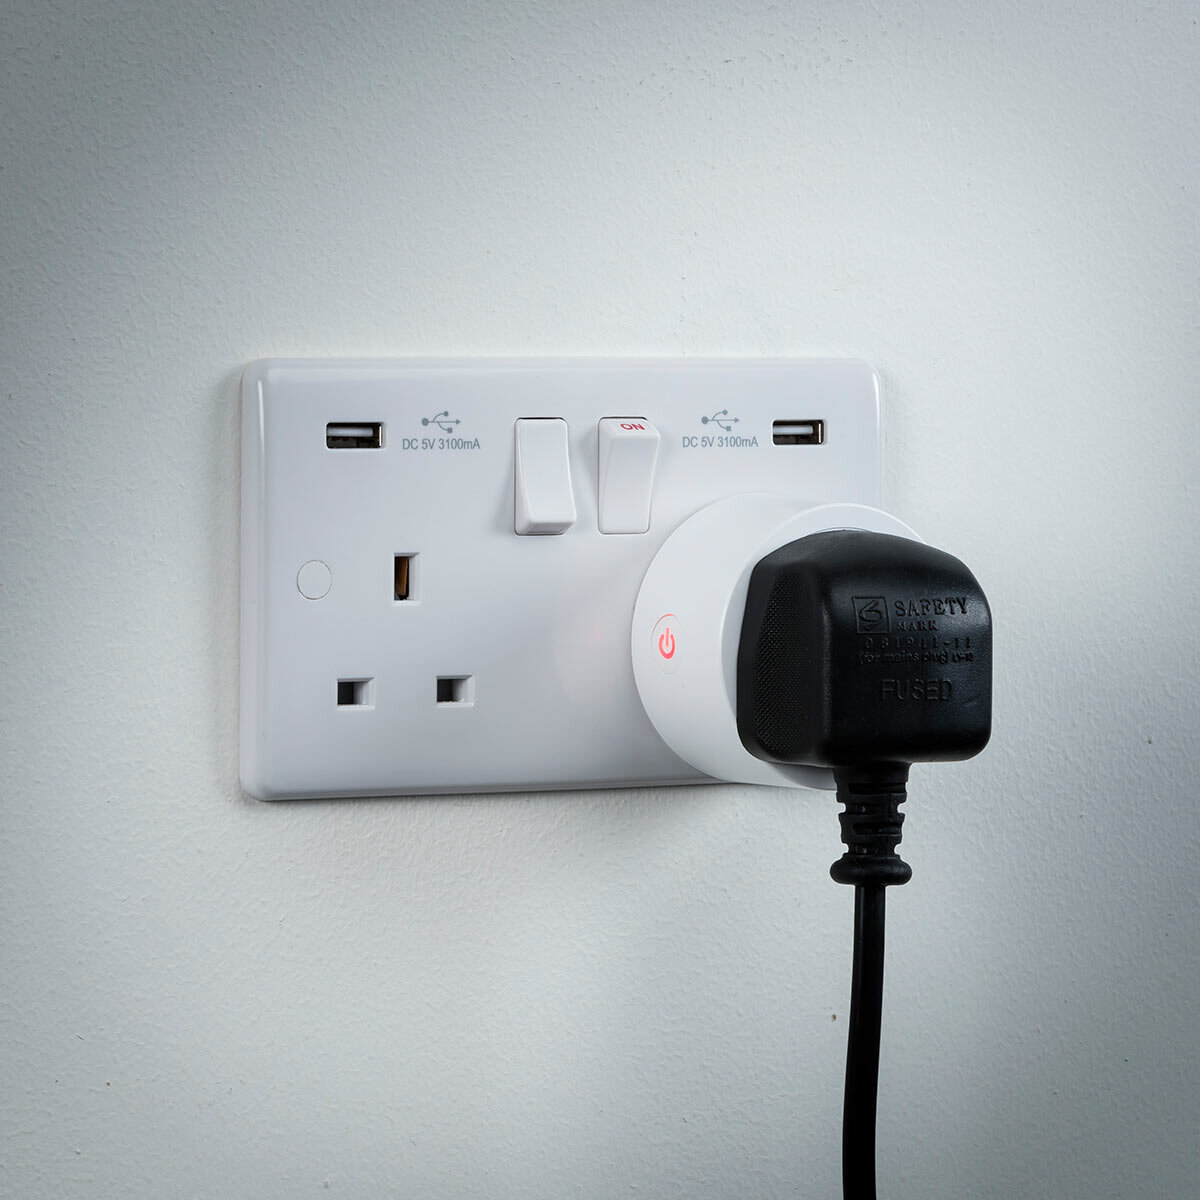 7 best smart plugs to keep track of your energy consumption